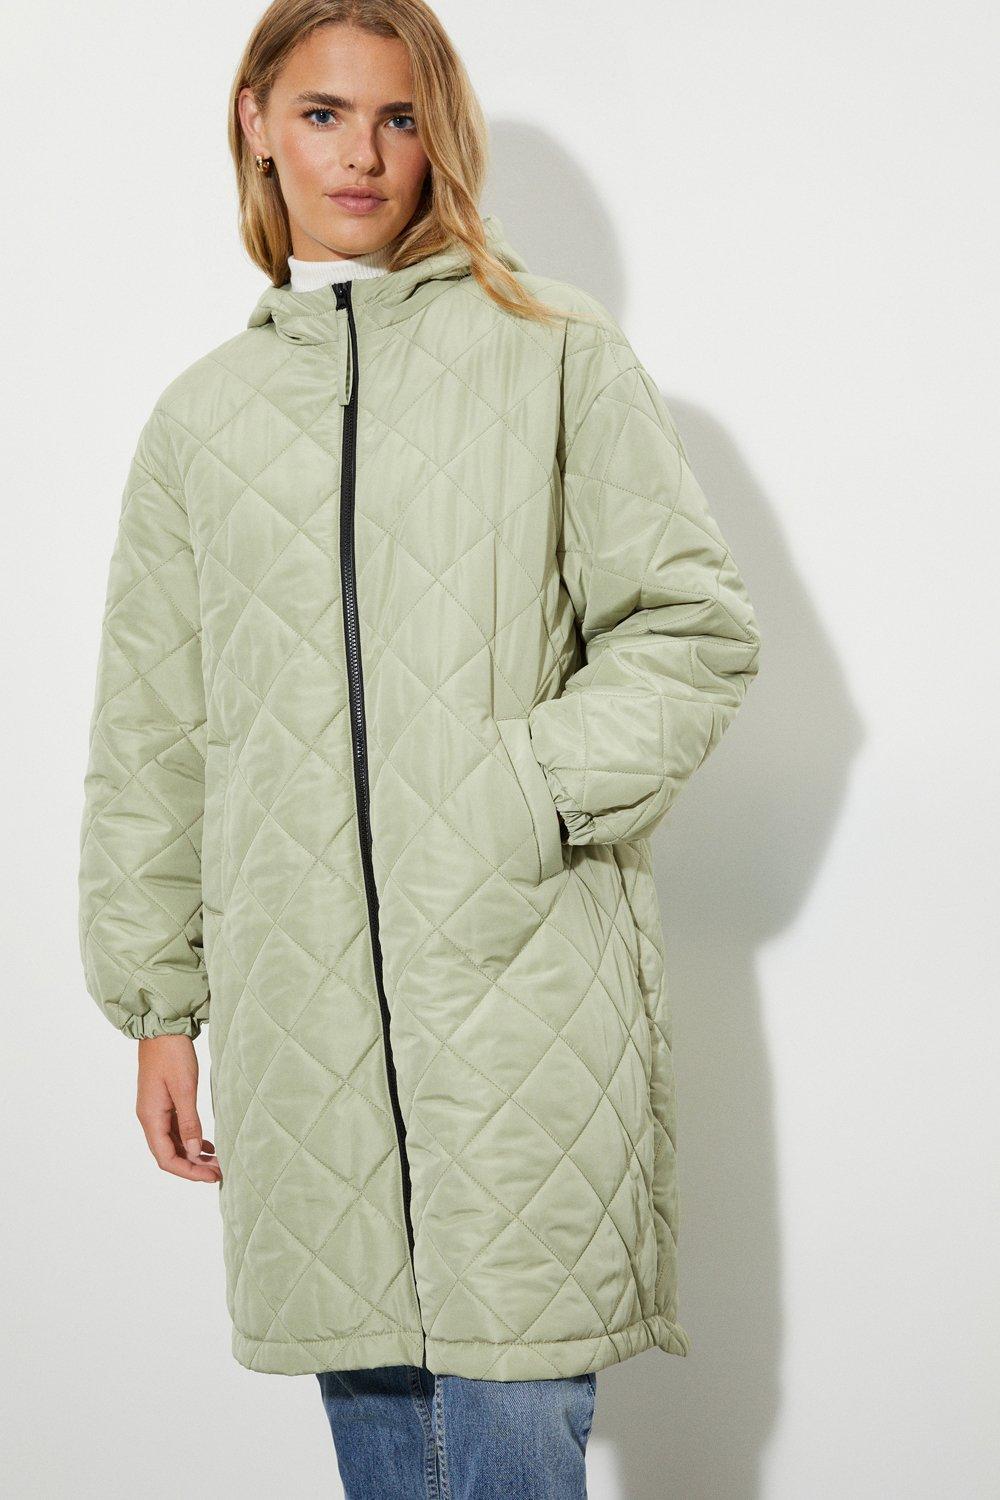 Women’s Oversized Hooded Diamond Quilted Parka Coat - sage - L